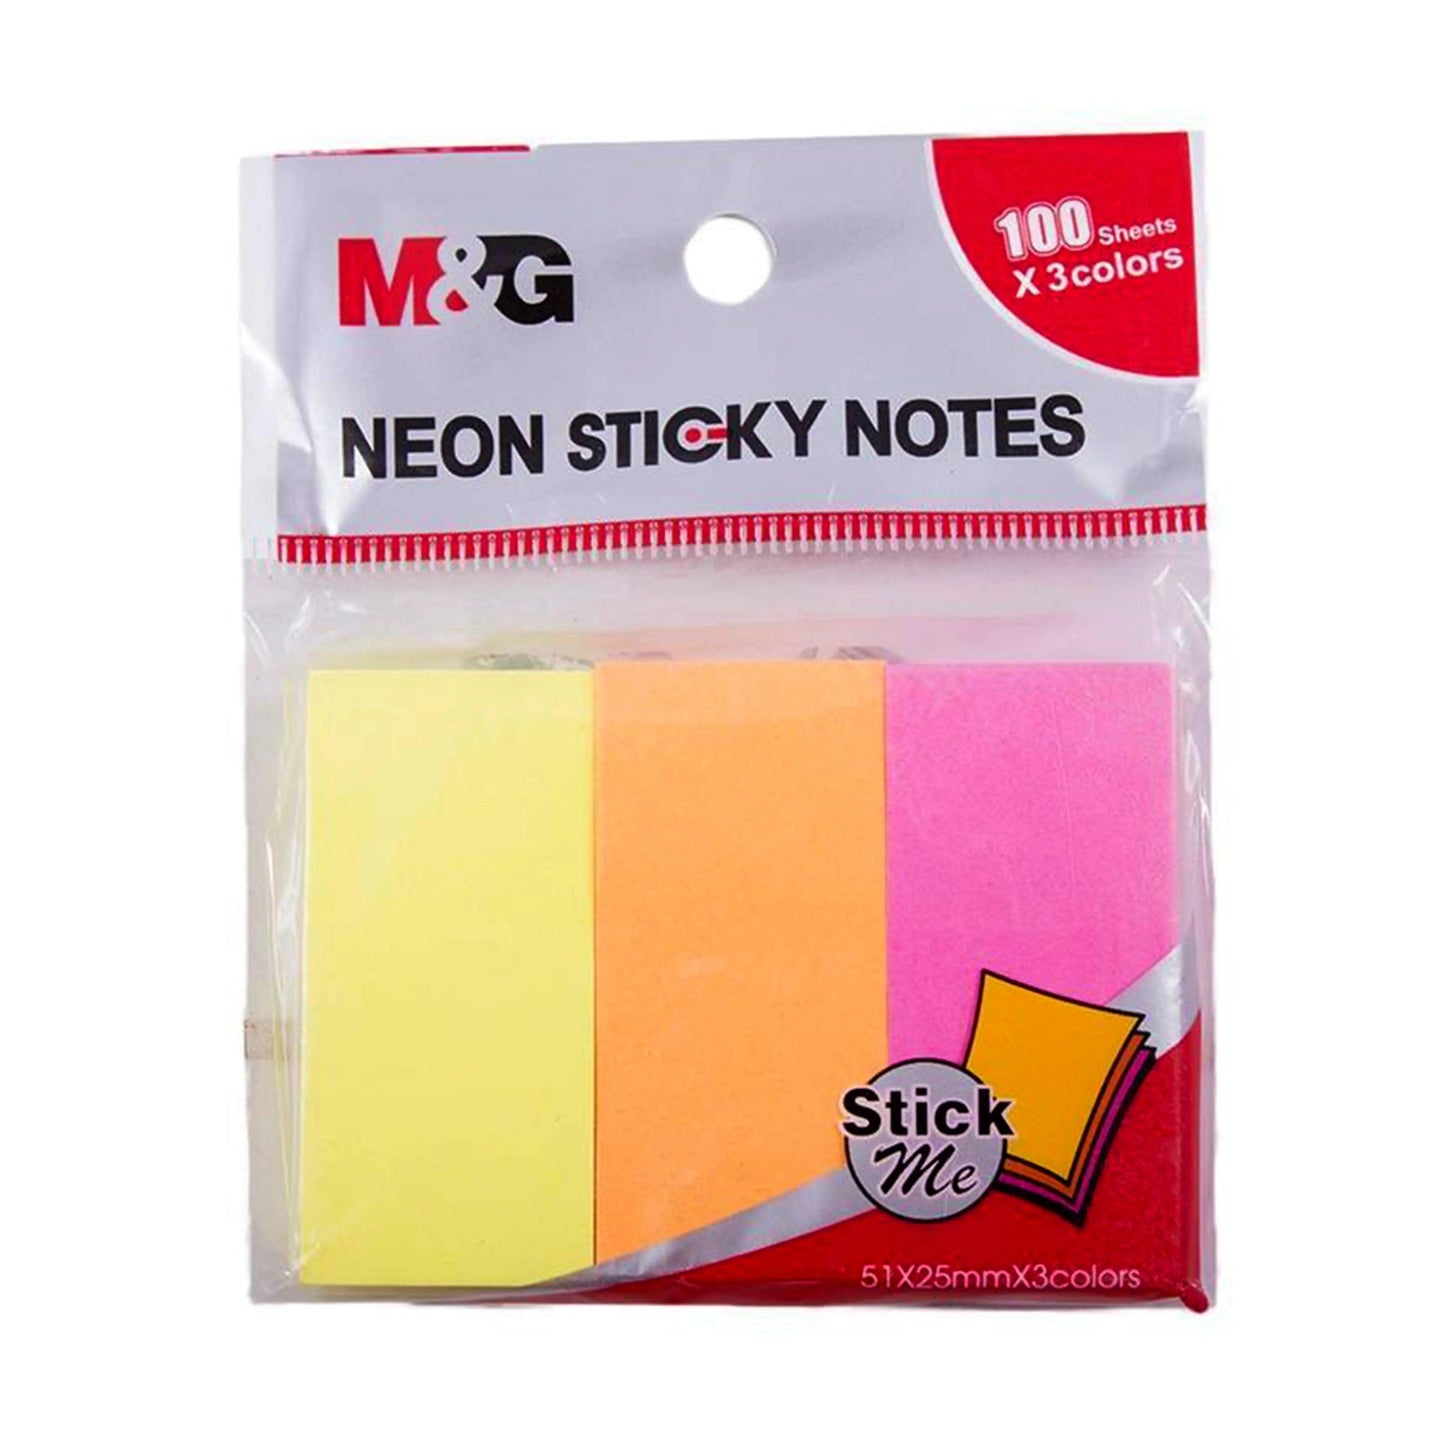 M&G 2x3 Coloured Sticky Note 3 in 1 M&G